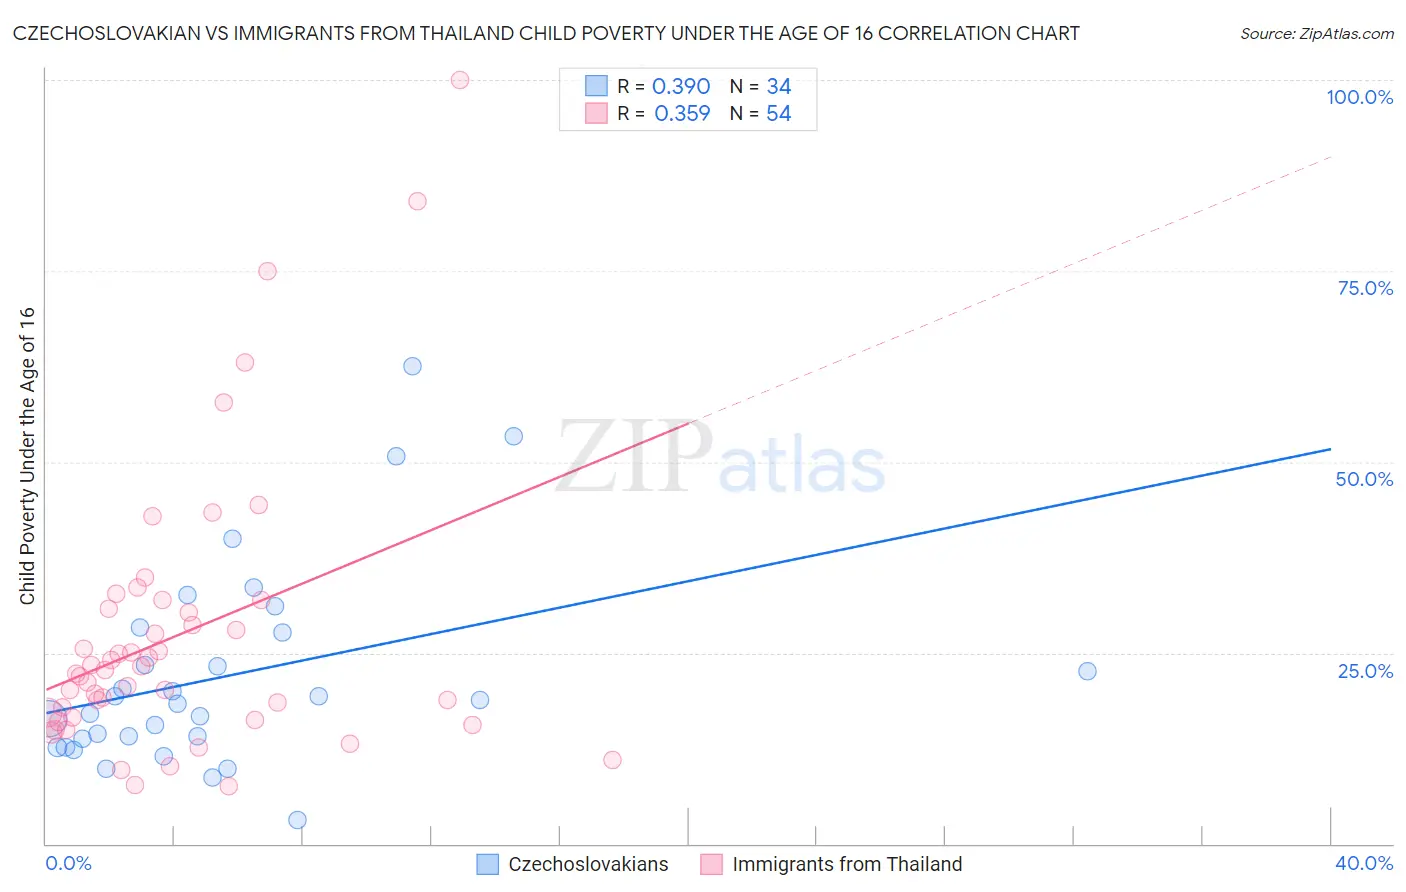 Czechoslovakian vs Immigrants from Thailand Child Poverty Under the Age of 16